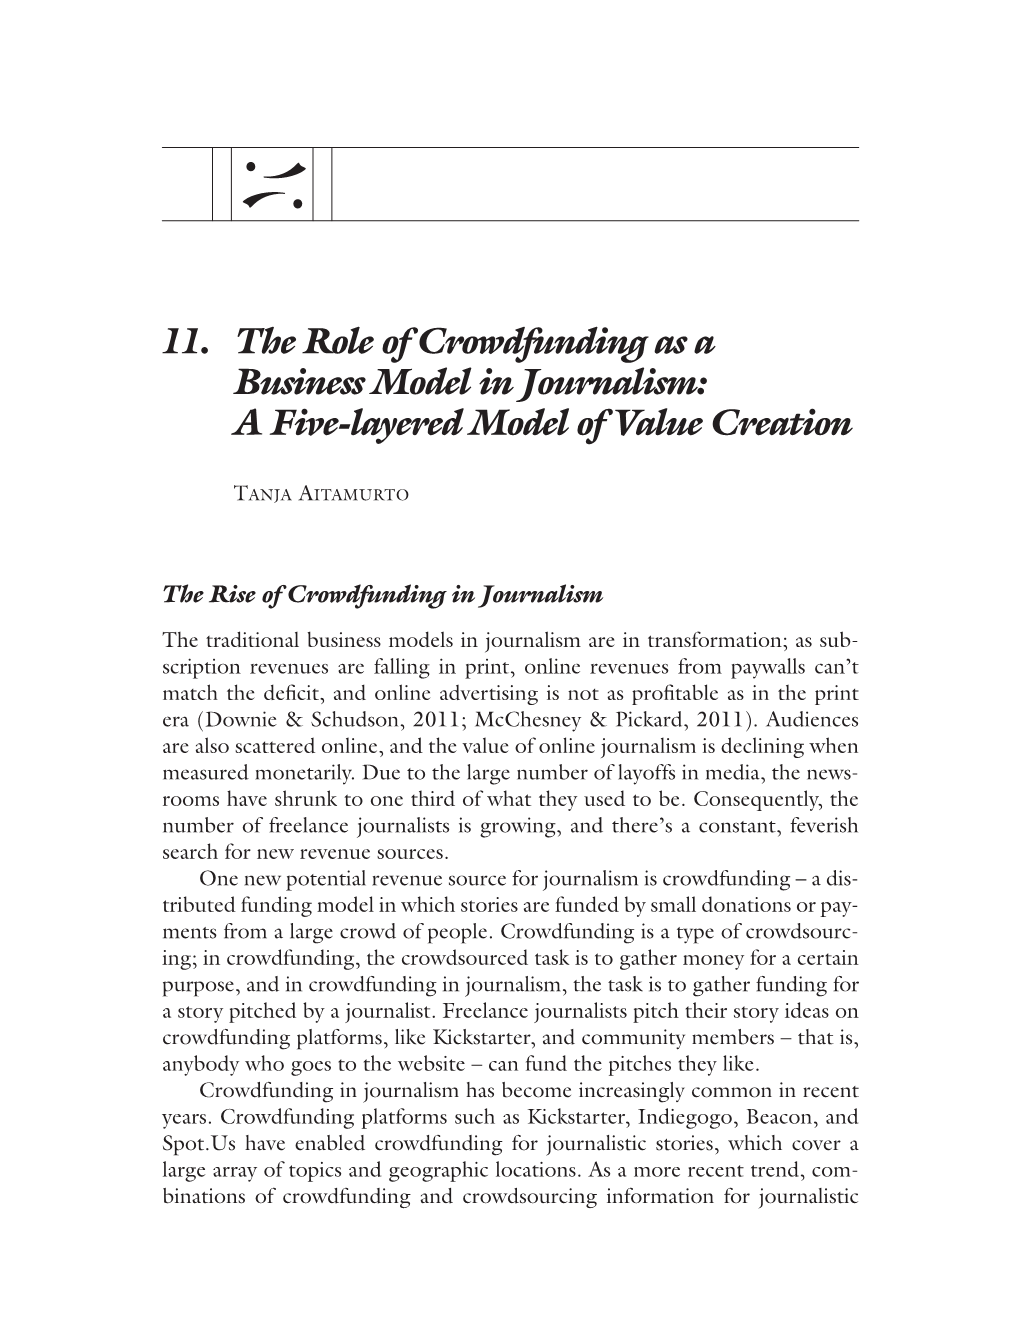 11. the Role of Crowdfunding As a Business Model in Journalism: a Five-Layered Model of Value Creation